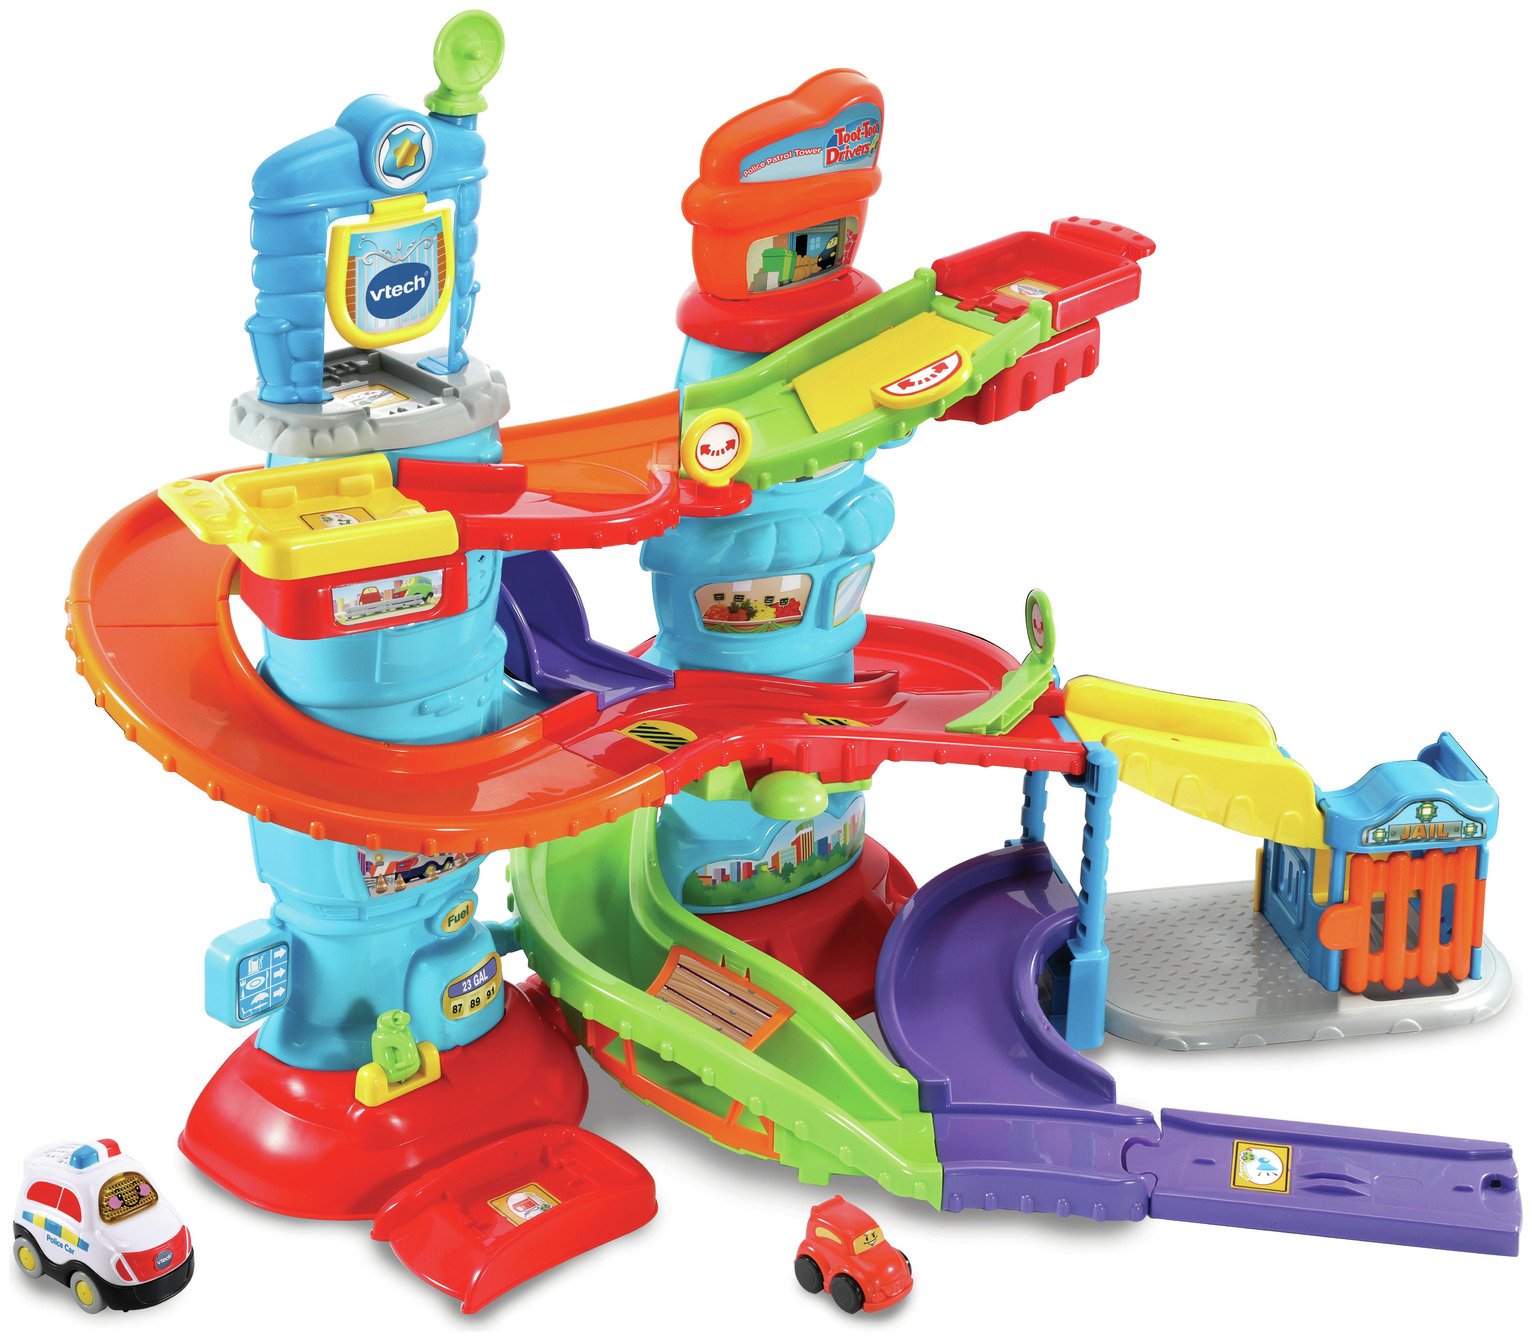 VTech Toot Toot Police Patrol Tower review